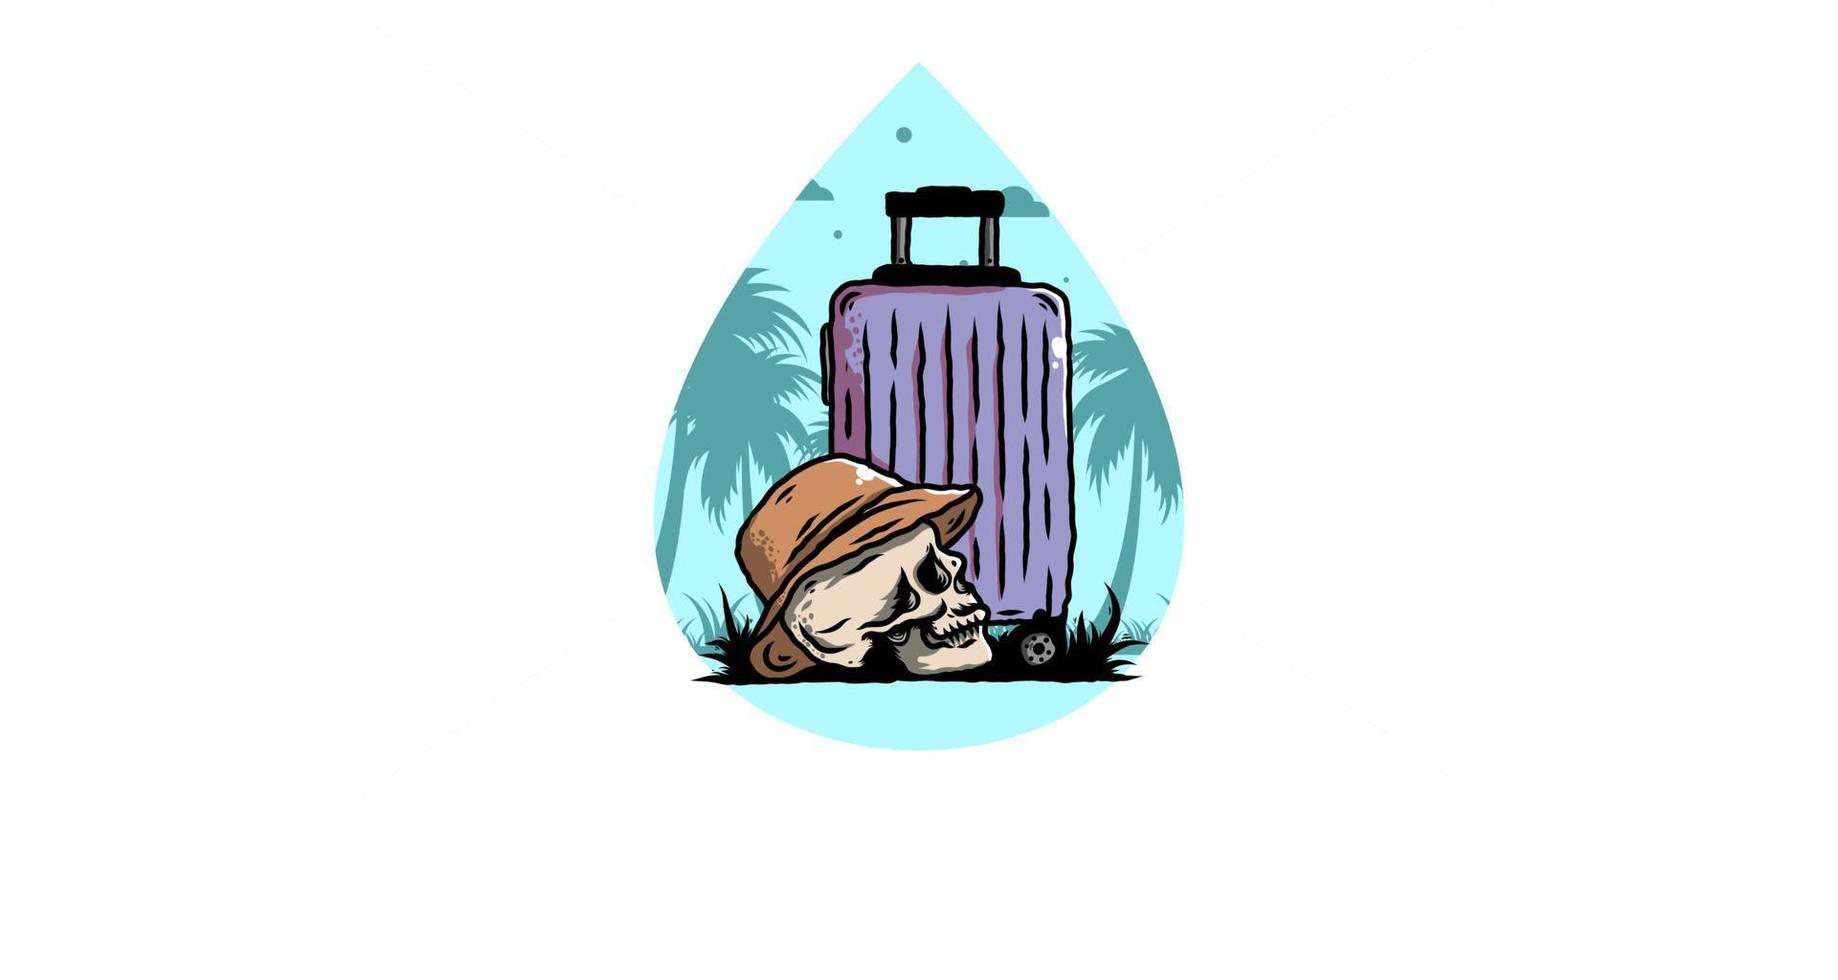 skull head wearing a hat under a traveling suitcase illustration vector